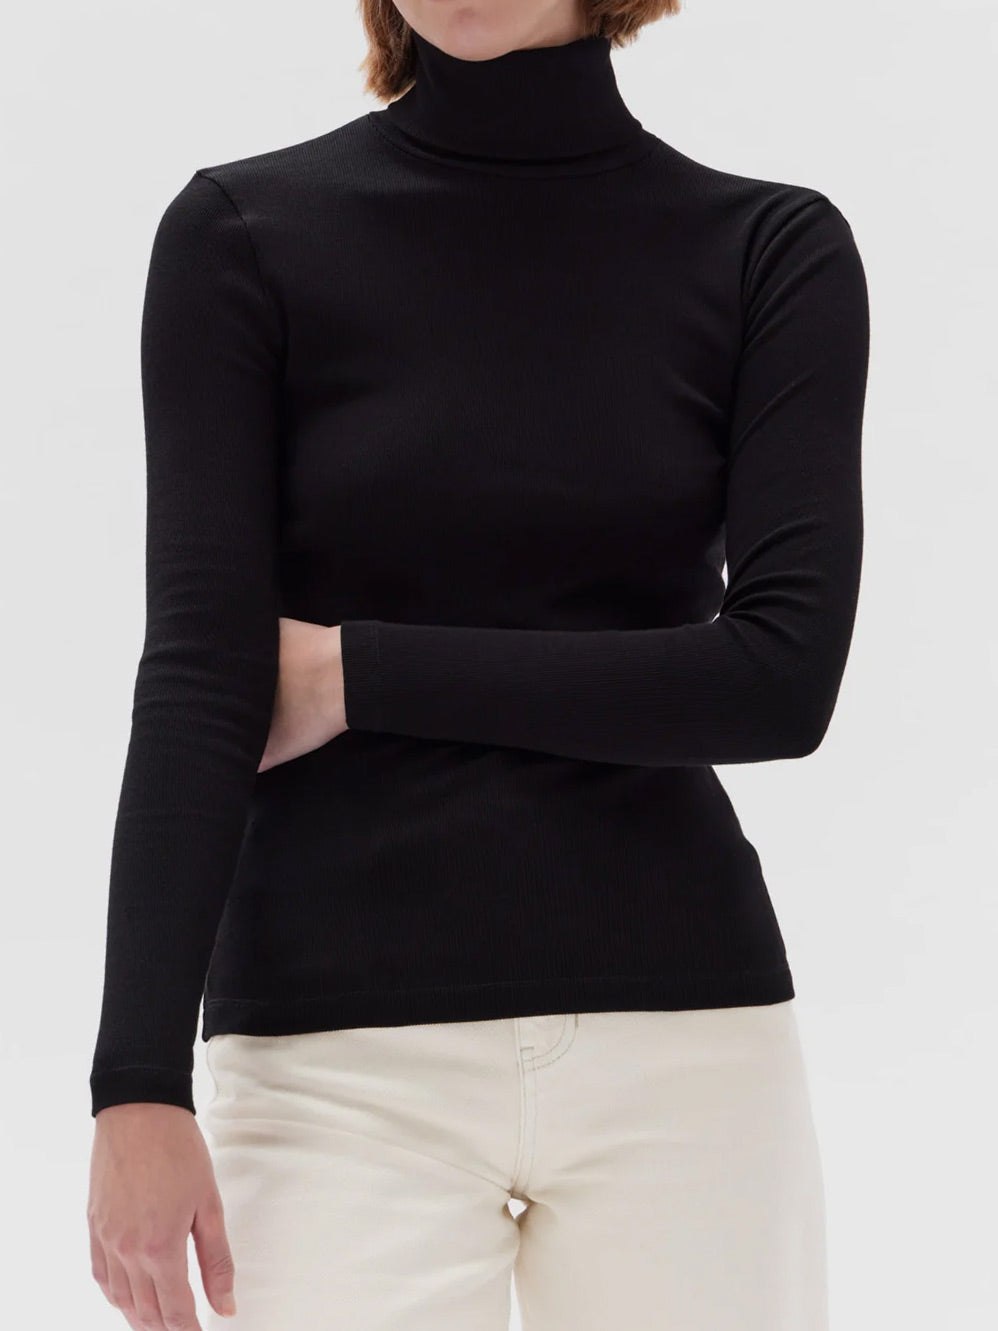 ASSEMBLY LABEL RIB ROLL NECK LONG SLEEVE TEE